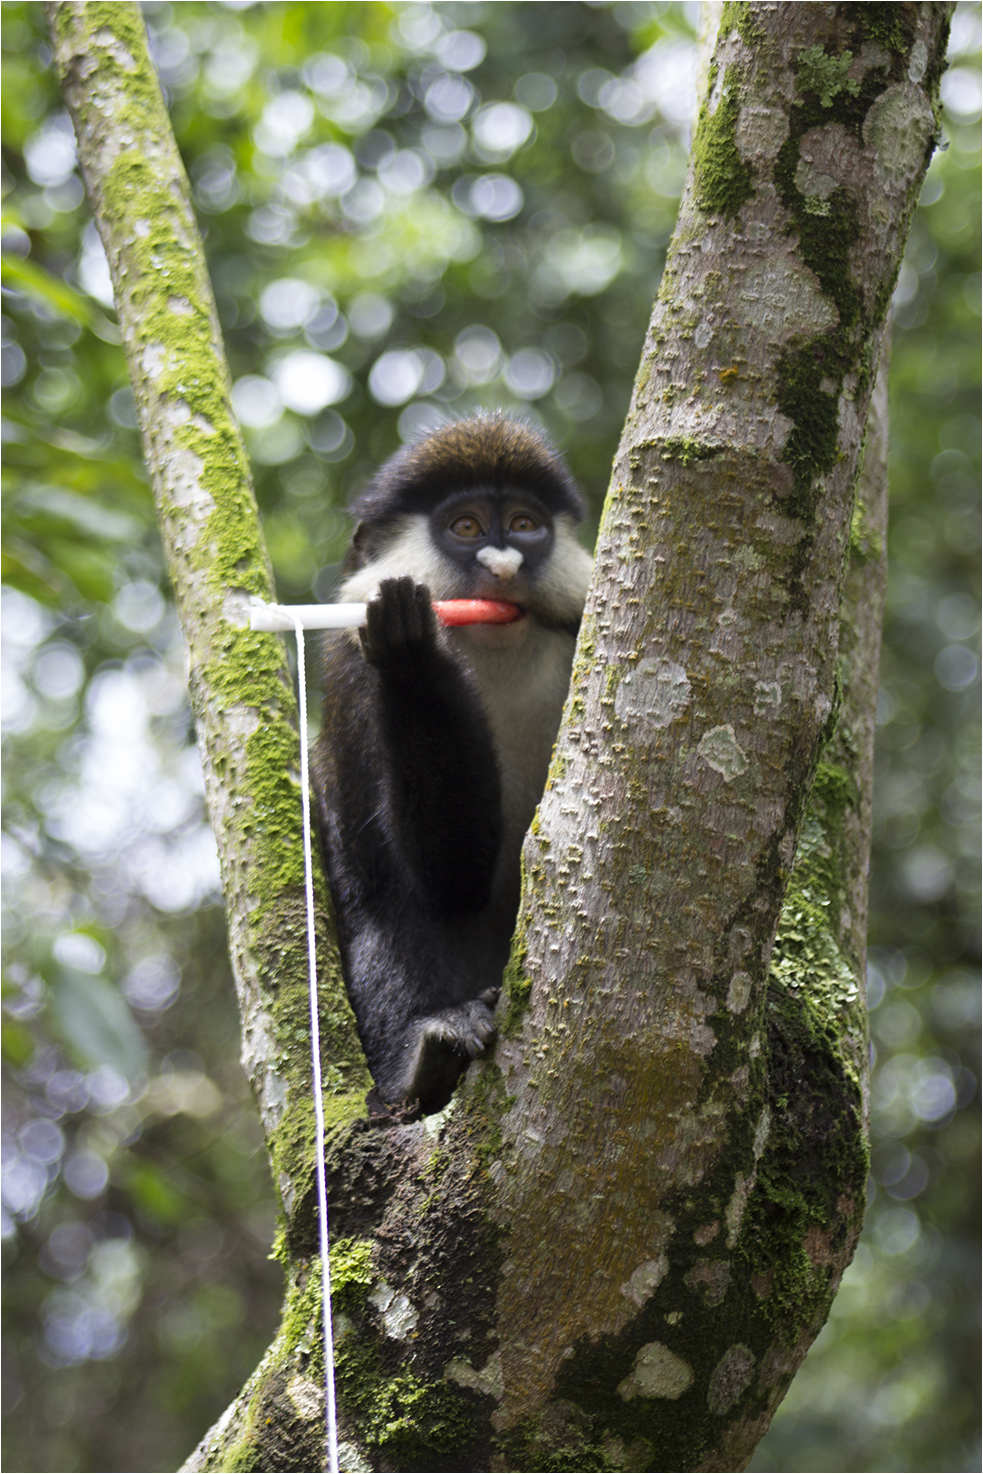 Red-tailed guenon in Bwindi Impenetrable Forest, Uganda. (T. Smiley Evans/UC Davis)